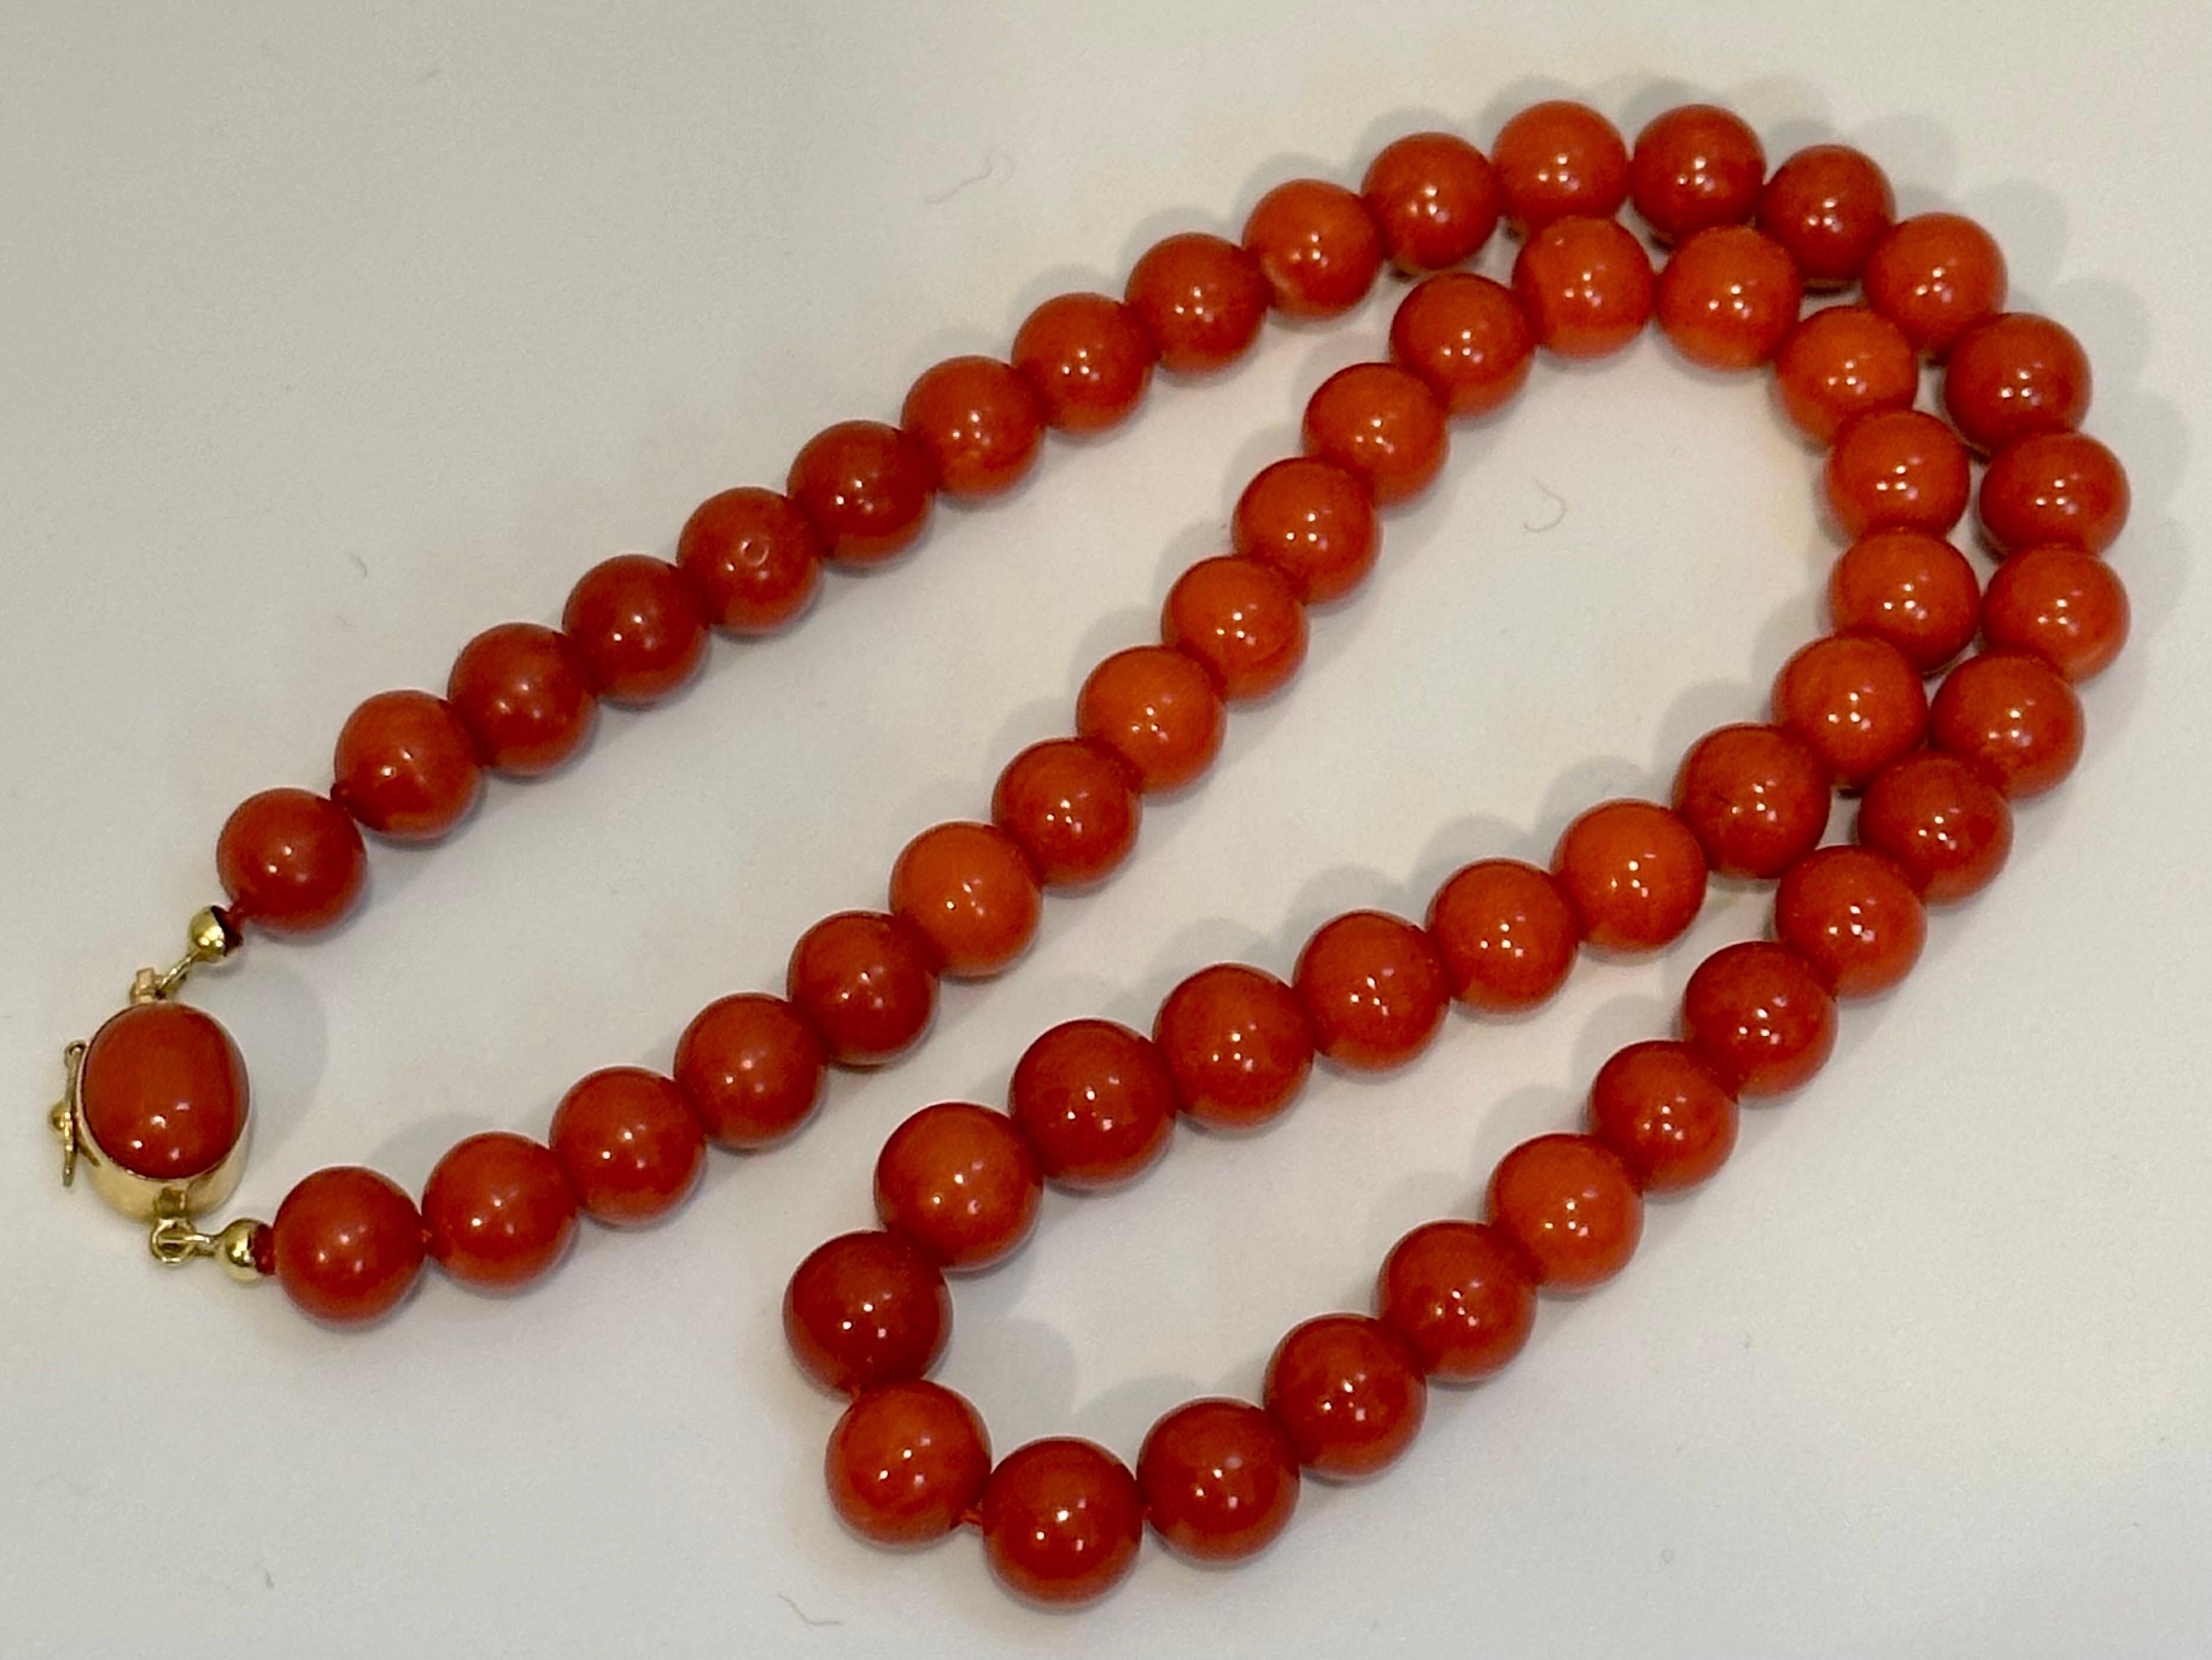 Red Coral and Gold Strand Necklace Estate Fine Jewelry
Vintage Natural Coral Bead Necklace 18 K Yellow  Estate.
A vintage piece.

Designed as a even size strand of 55 orangy red coral beads,  8 mm, joined by a gold and oval coral clasp.
Lenght: